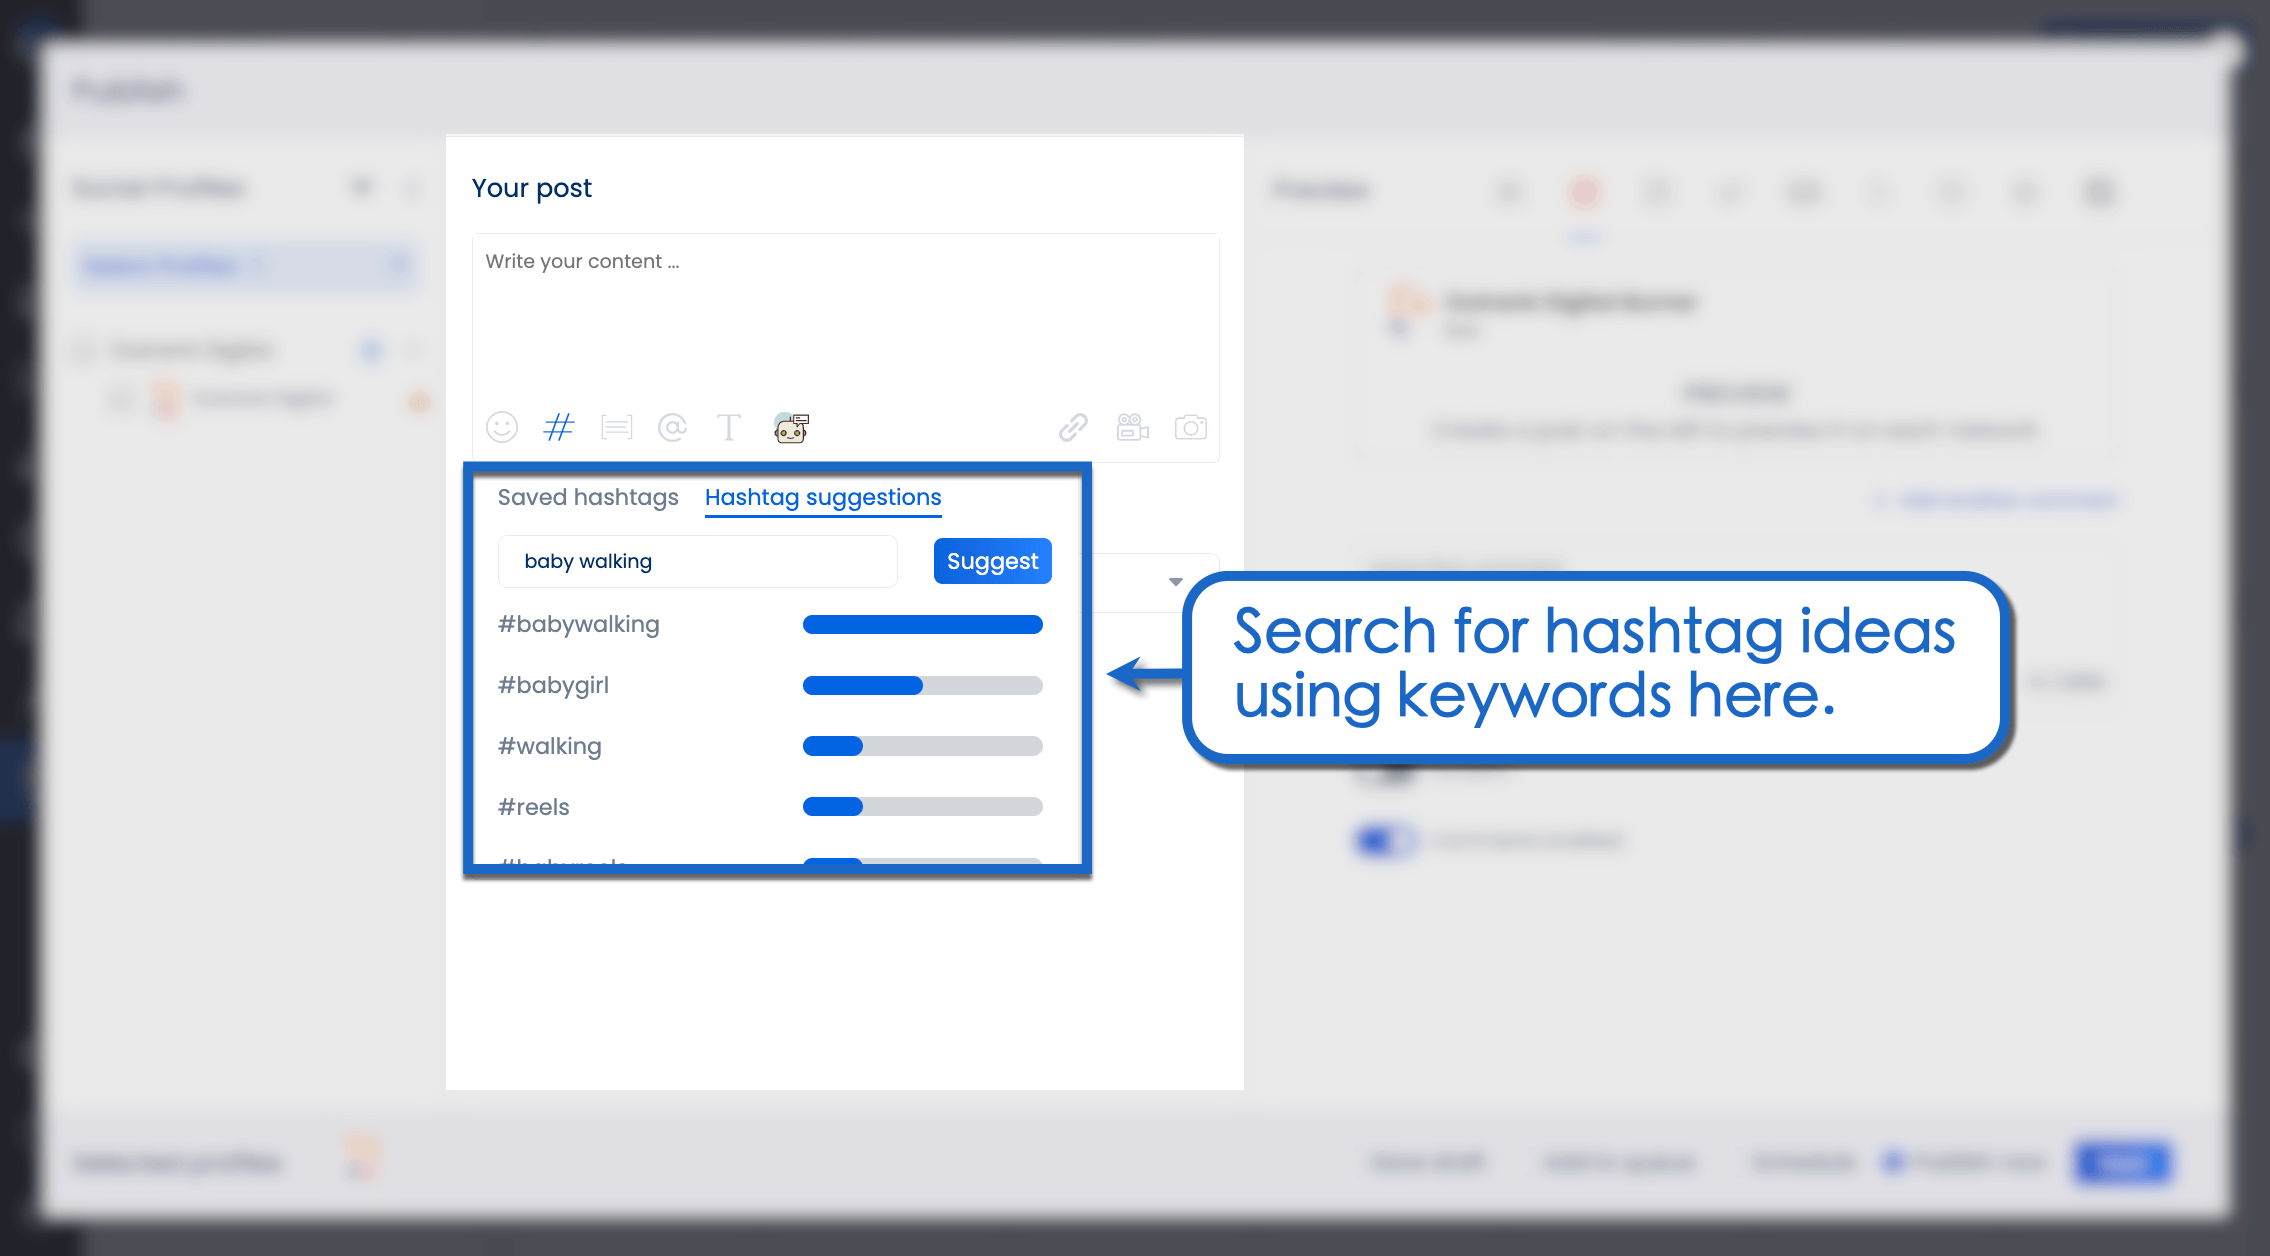 Search for hashtags using a keyword.